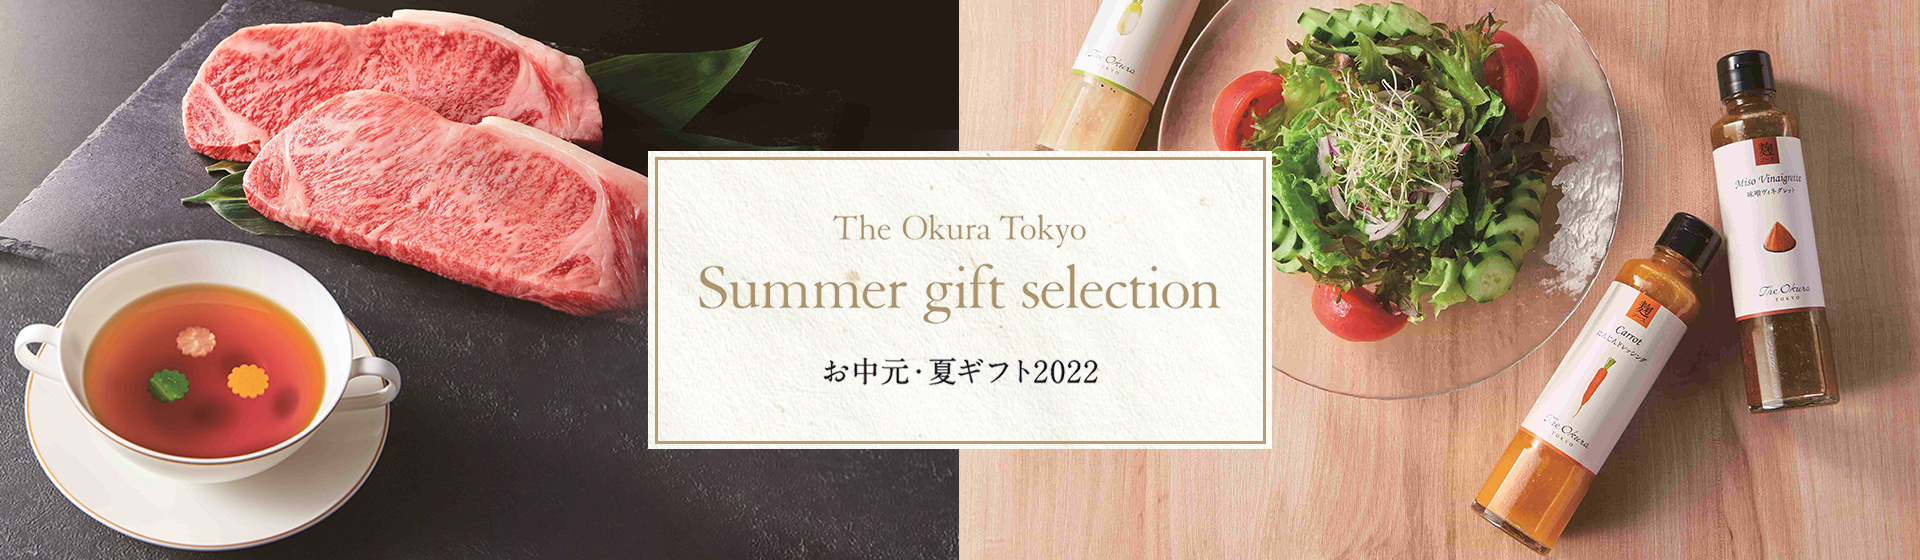 Summer gift selection